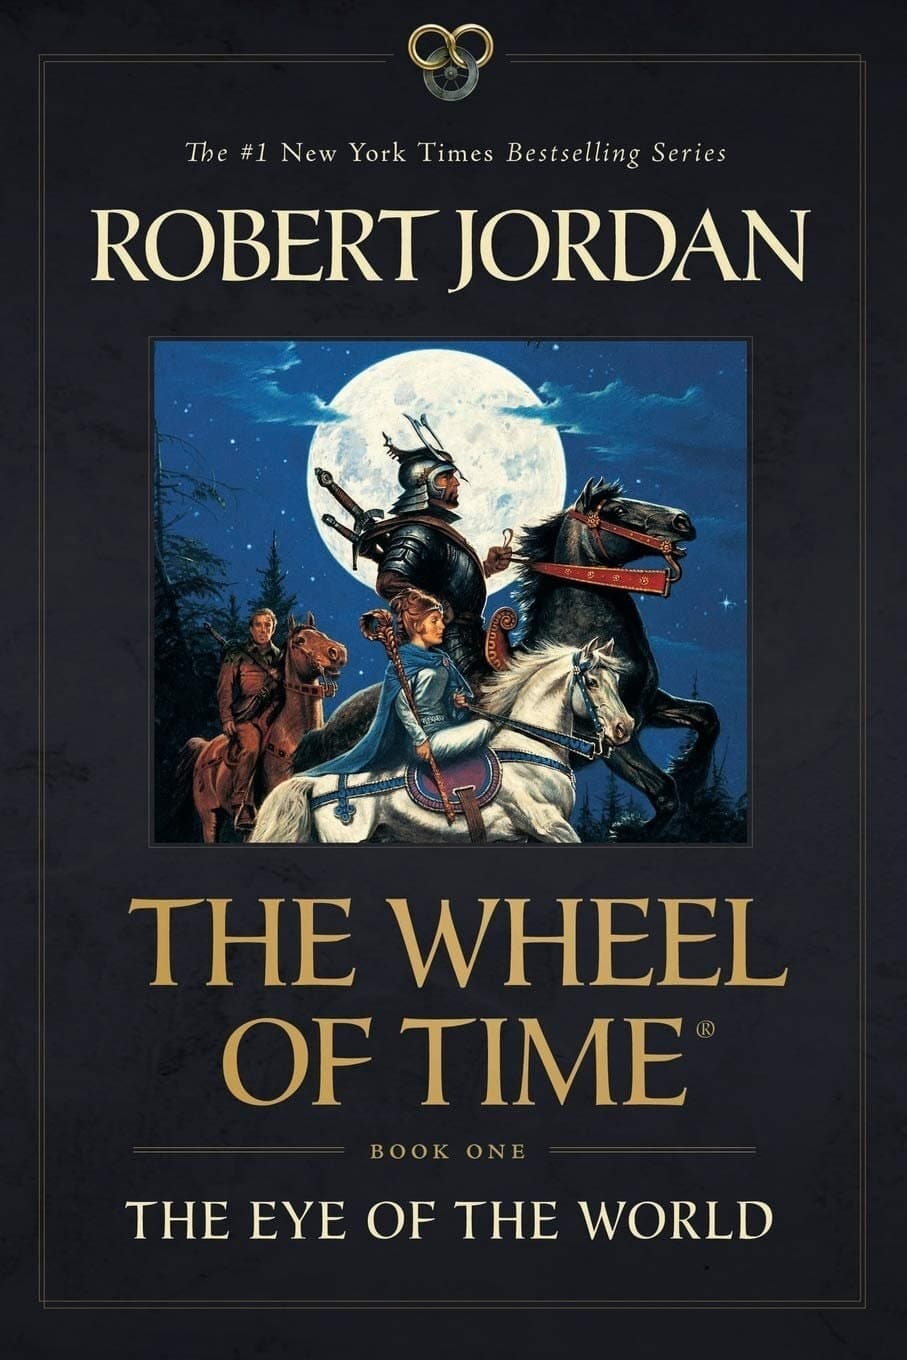 Poster for the movie "The Wheel of Time : Age of Legends"